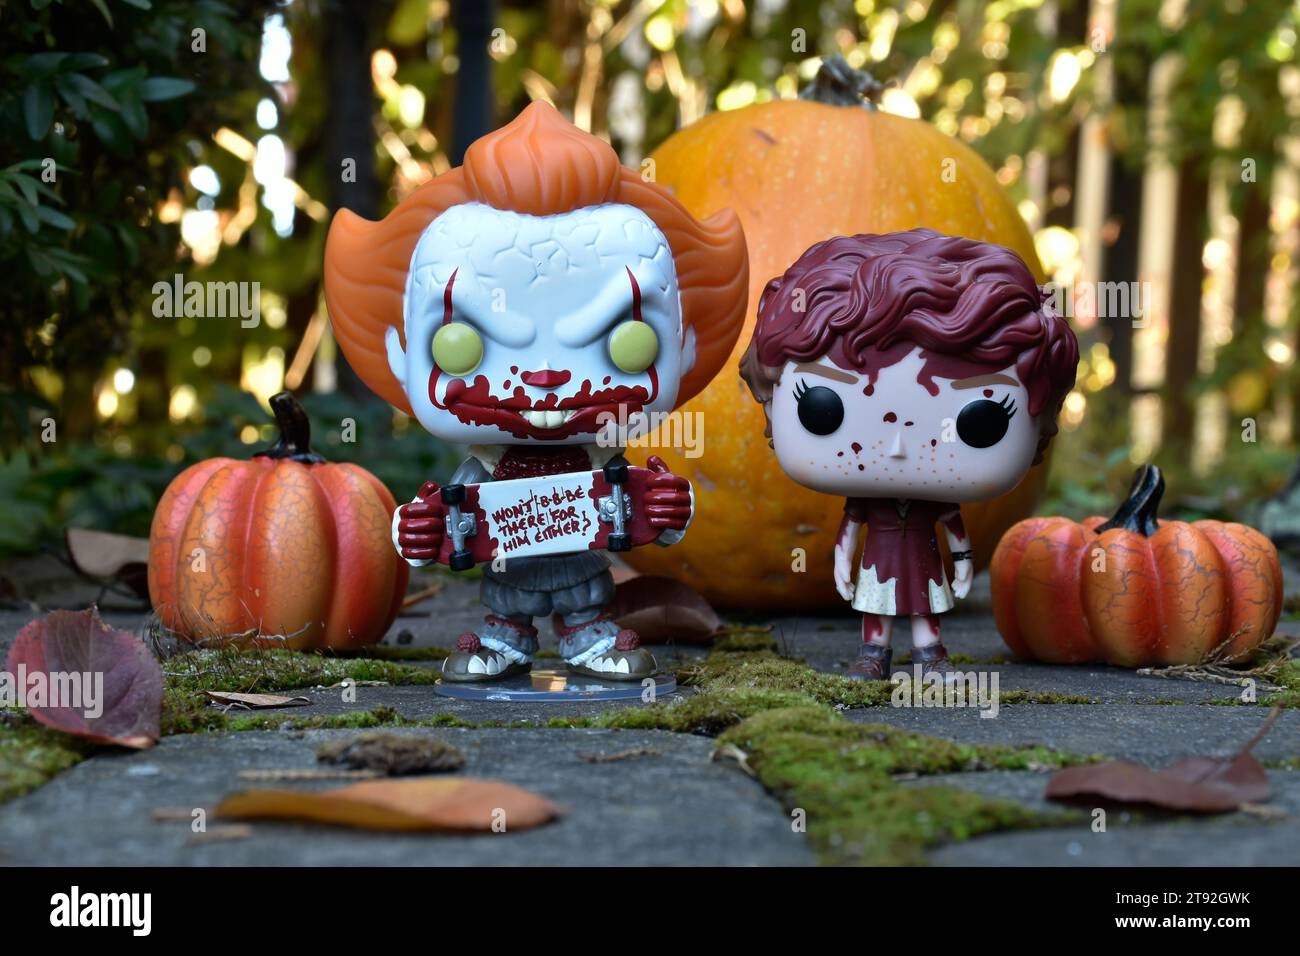 Funko Pop action figures of Pennywise clown and Beverly Marsh from horror movie It. Halloween, spooky season, pumpkins, decor, moss, autumn leaves. Stock Photo